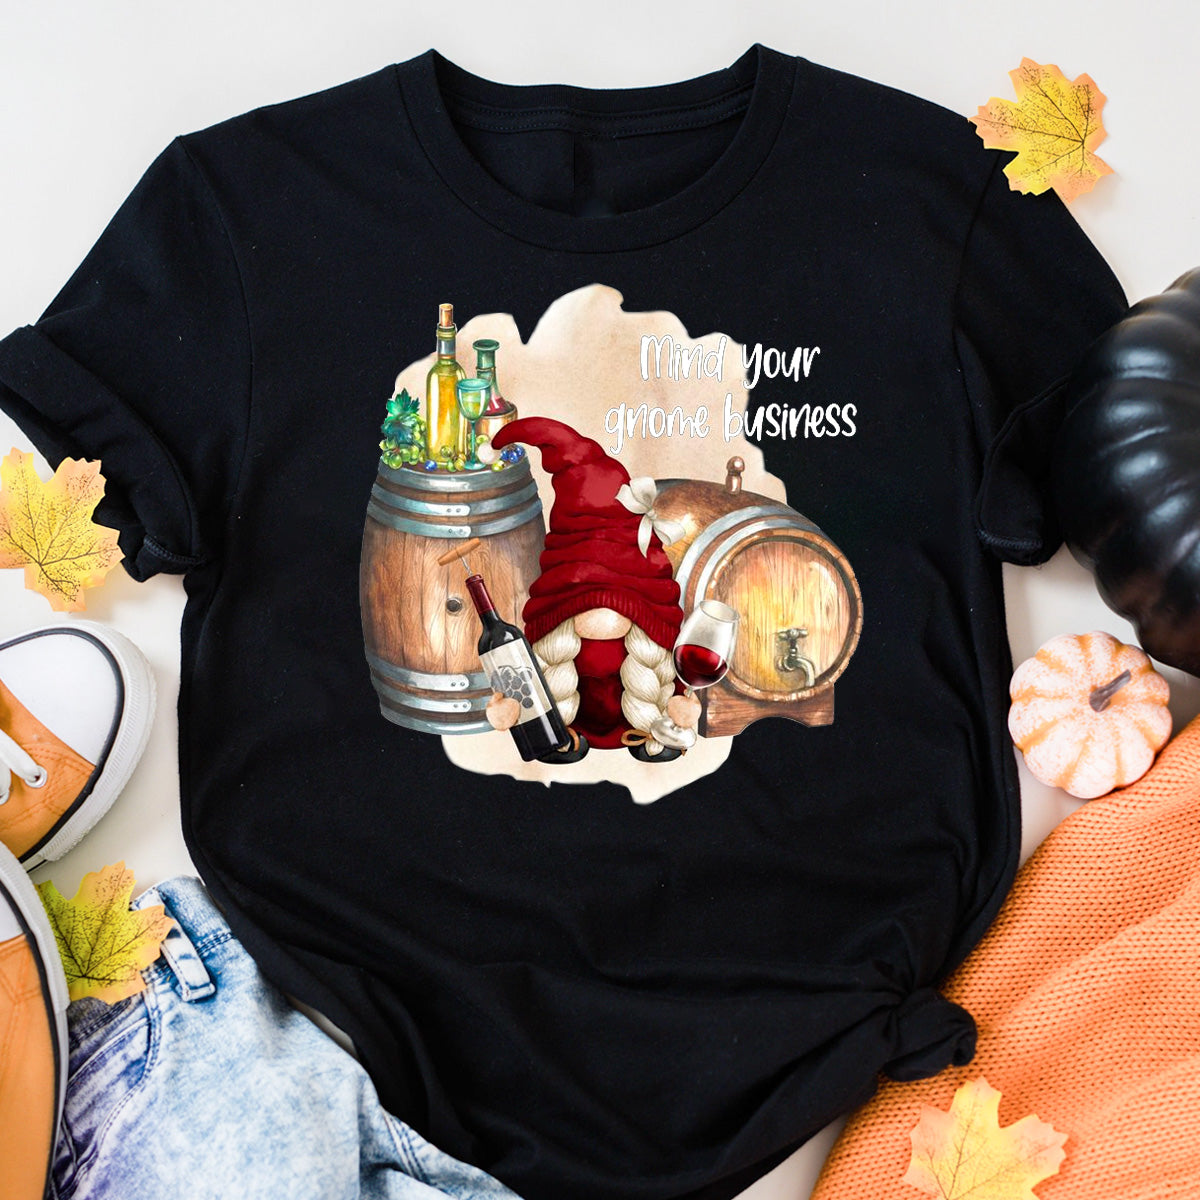 Mind Your Gnome Business T-Shirt